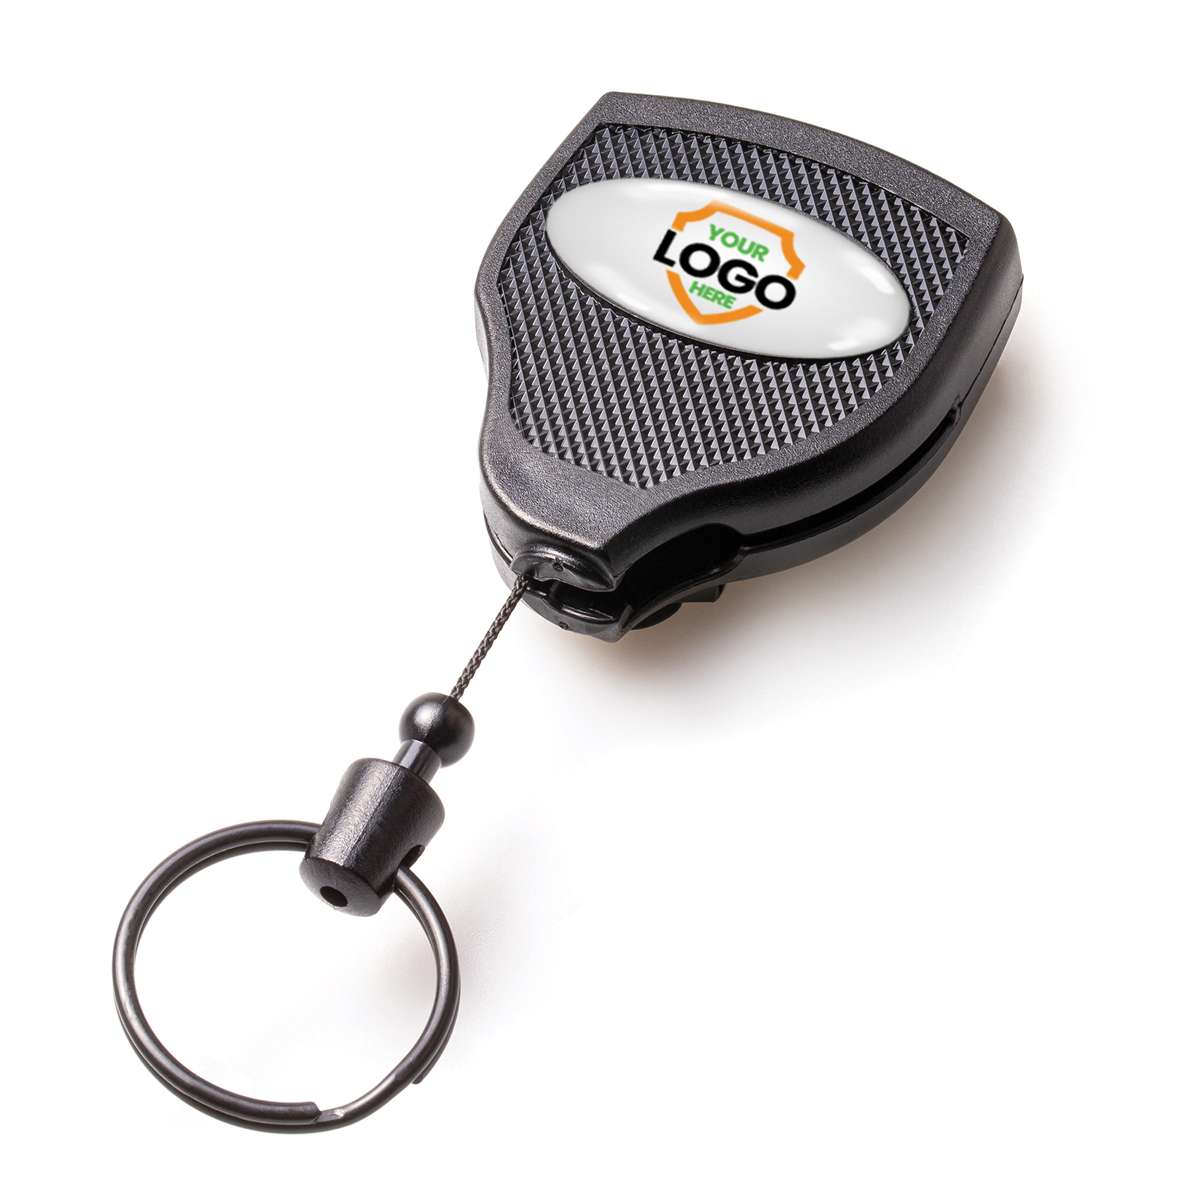 Customizable Key-Bak Super 48 Heavy Duty Key Reel (S48K) - Customize with Your Own Logo and Design